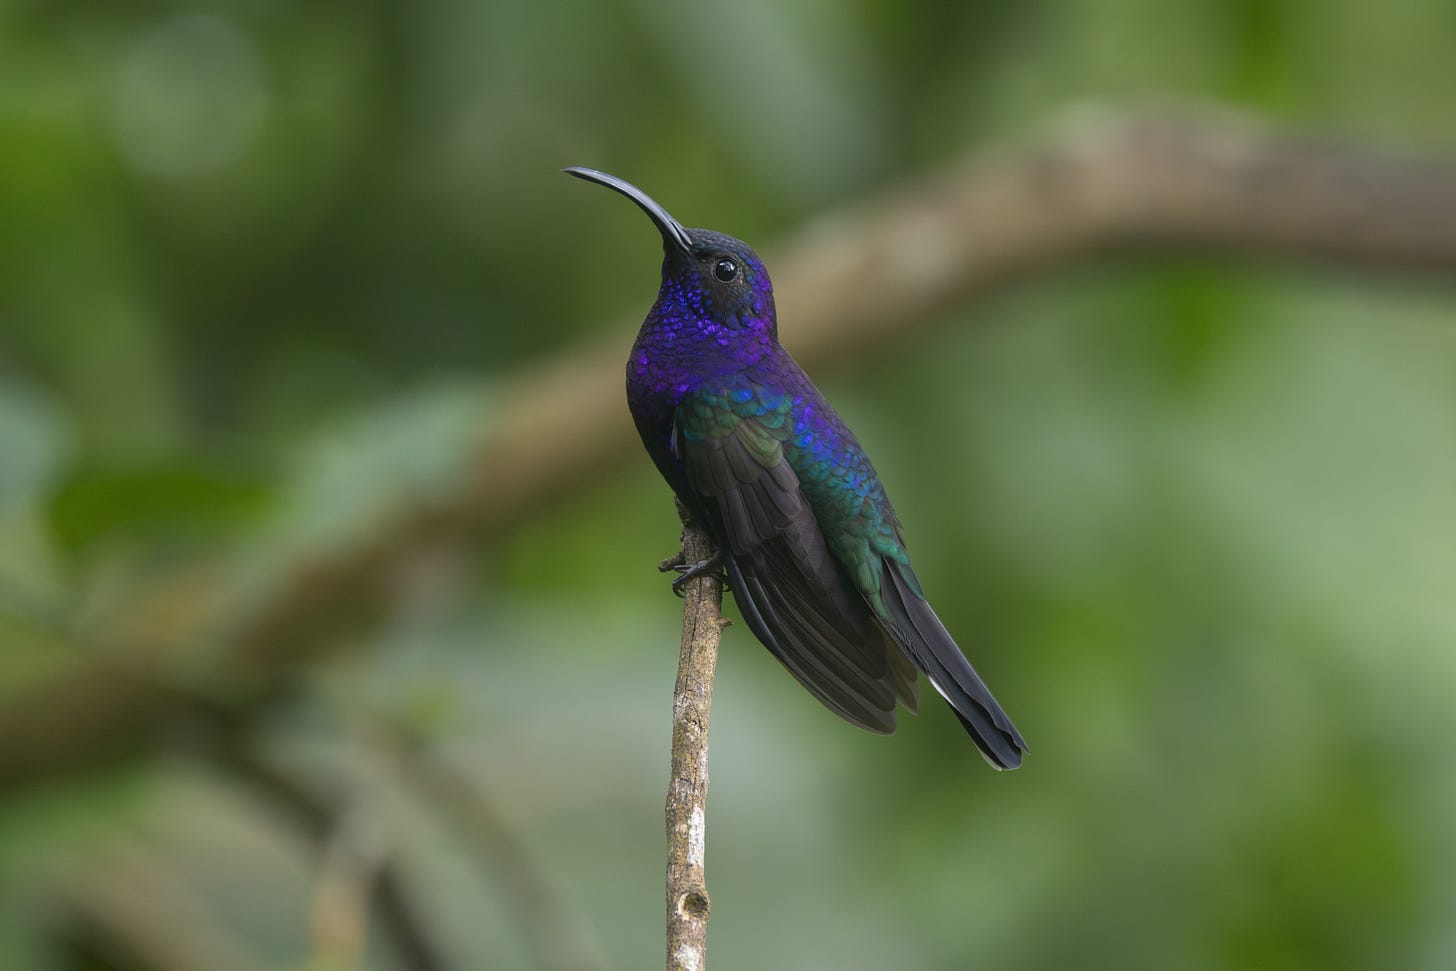 a large, purple hummingbird with a green rump perched on a stick facing left. it has a black mask and a thick, deeply curved beak.